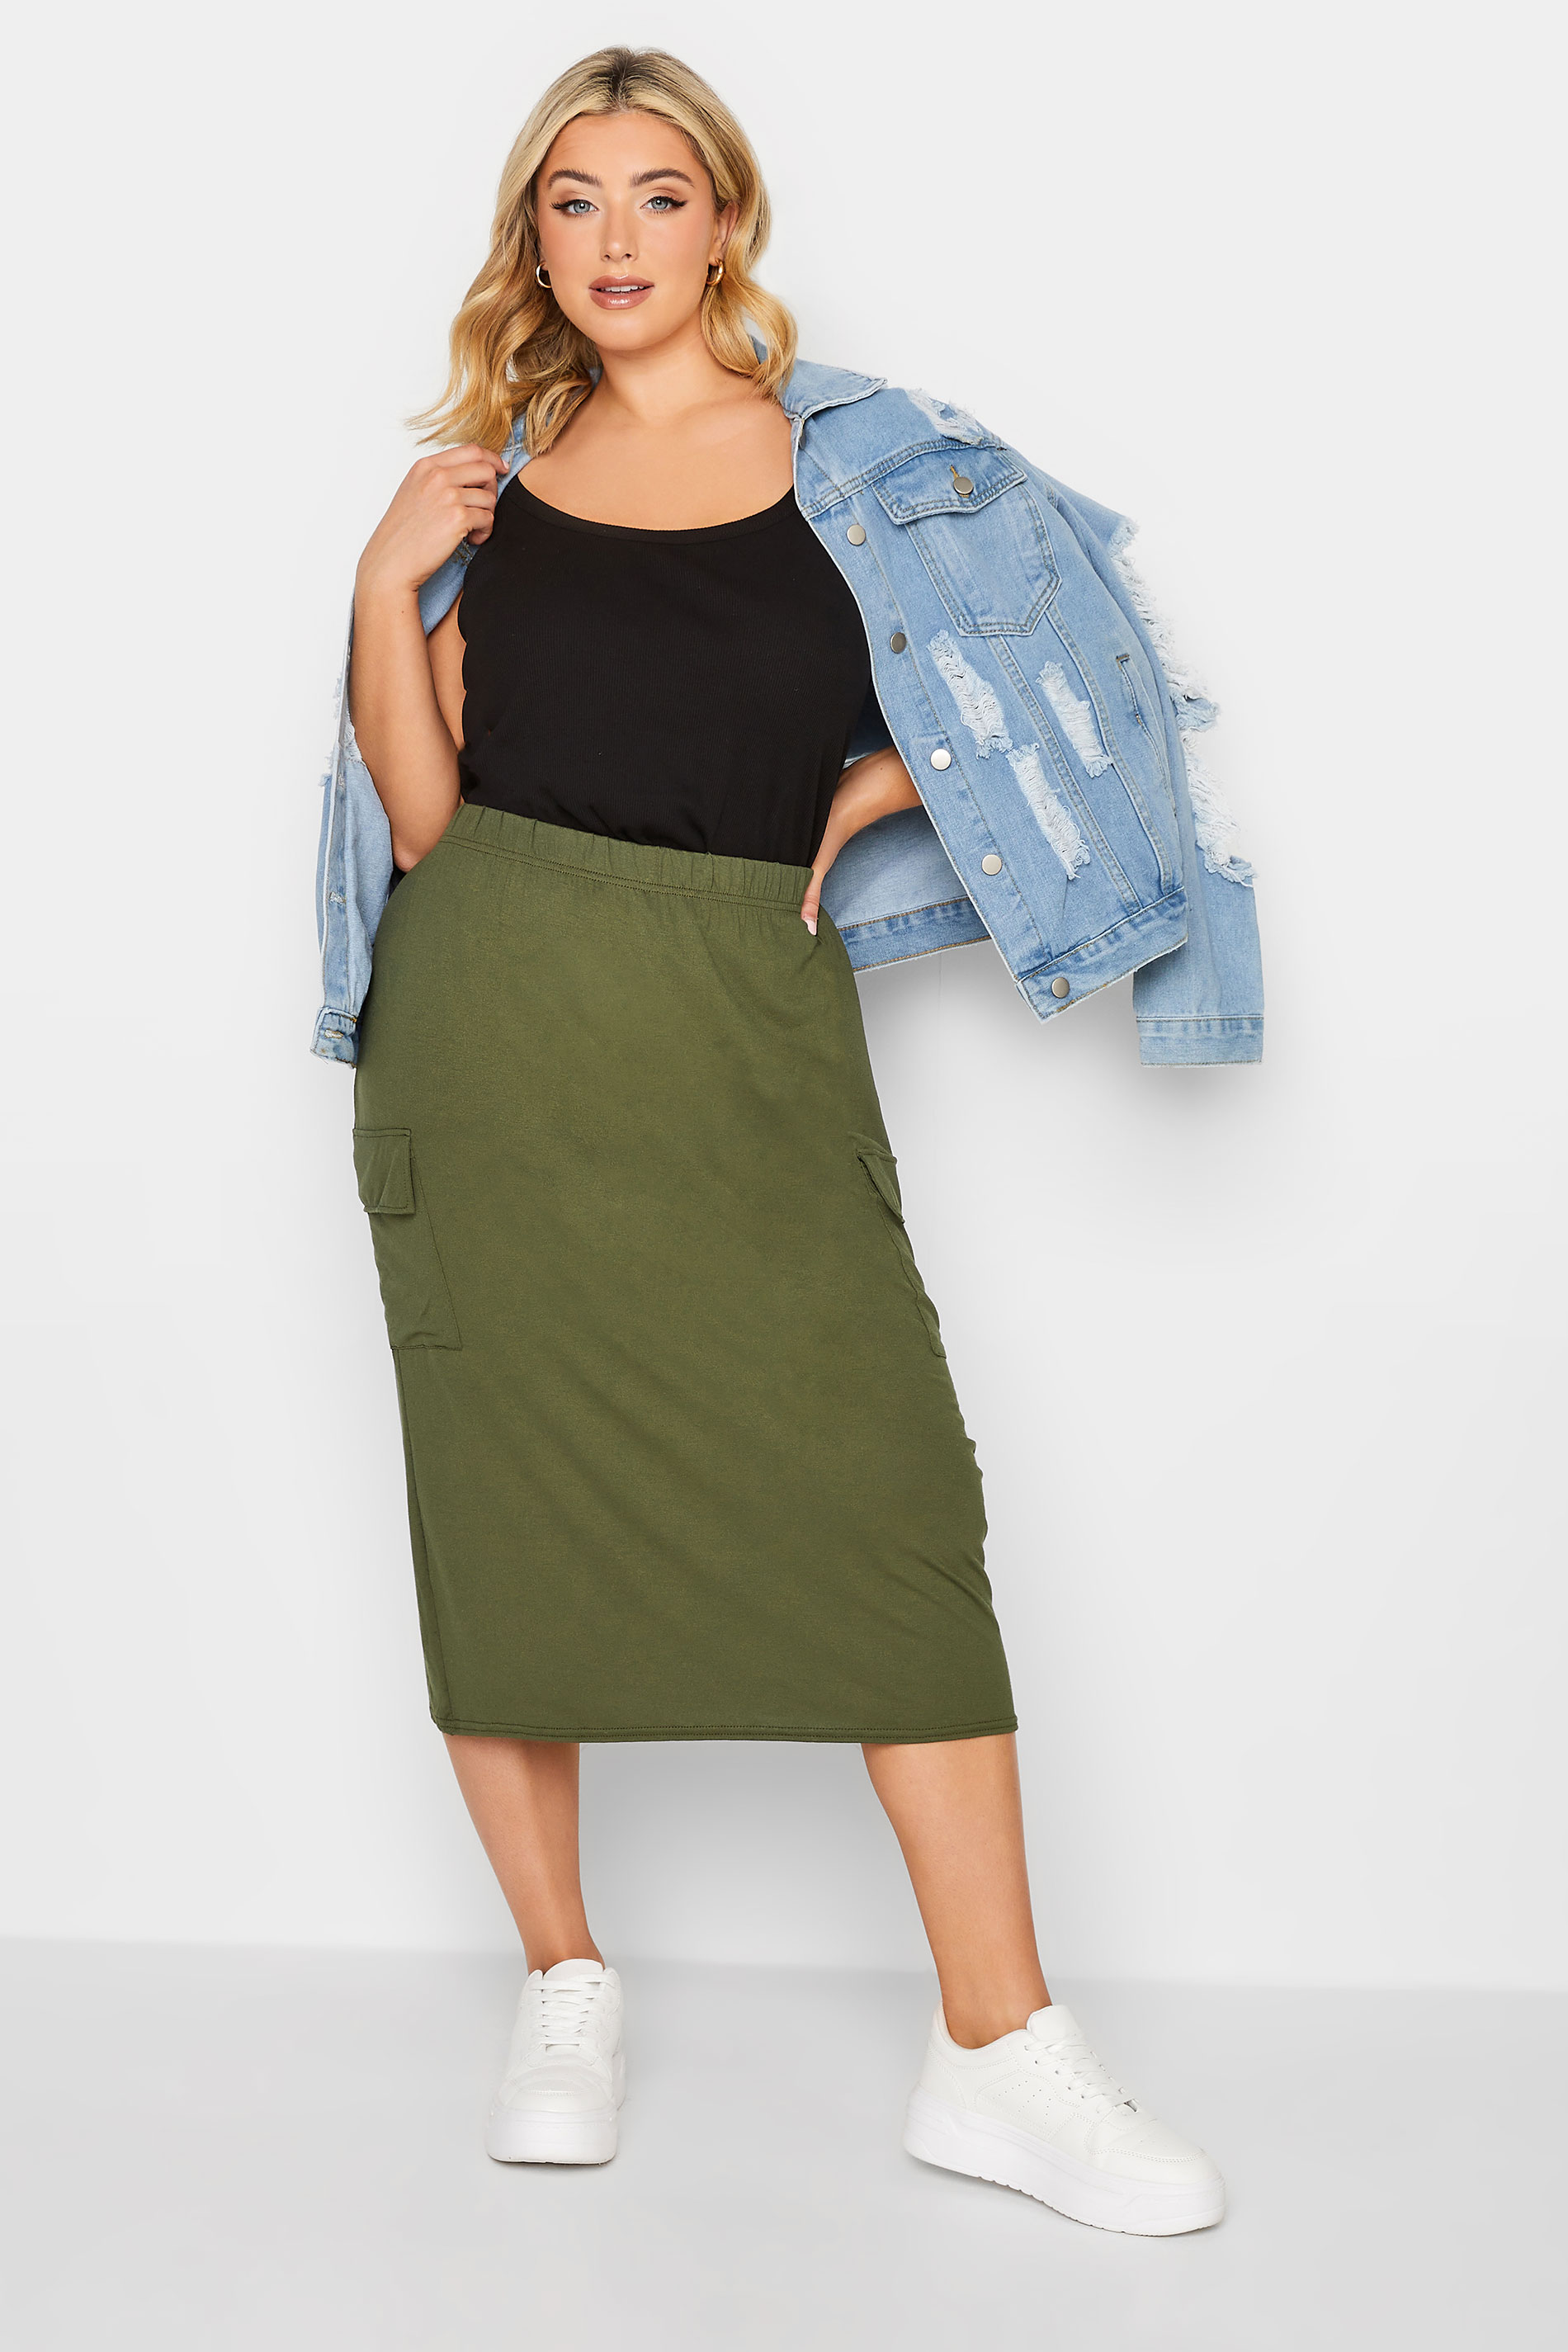 Update more than 143 utility skirt plus size